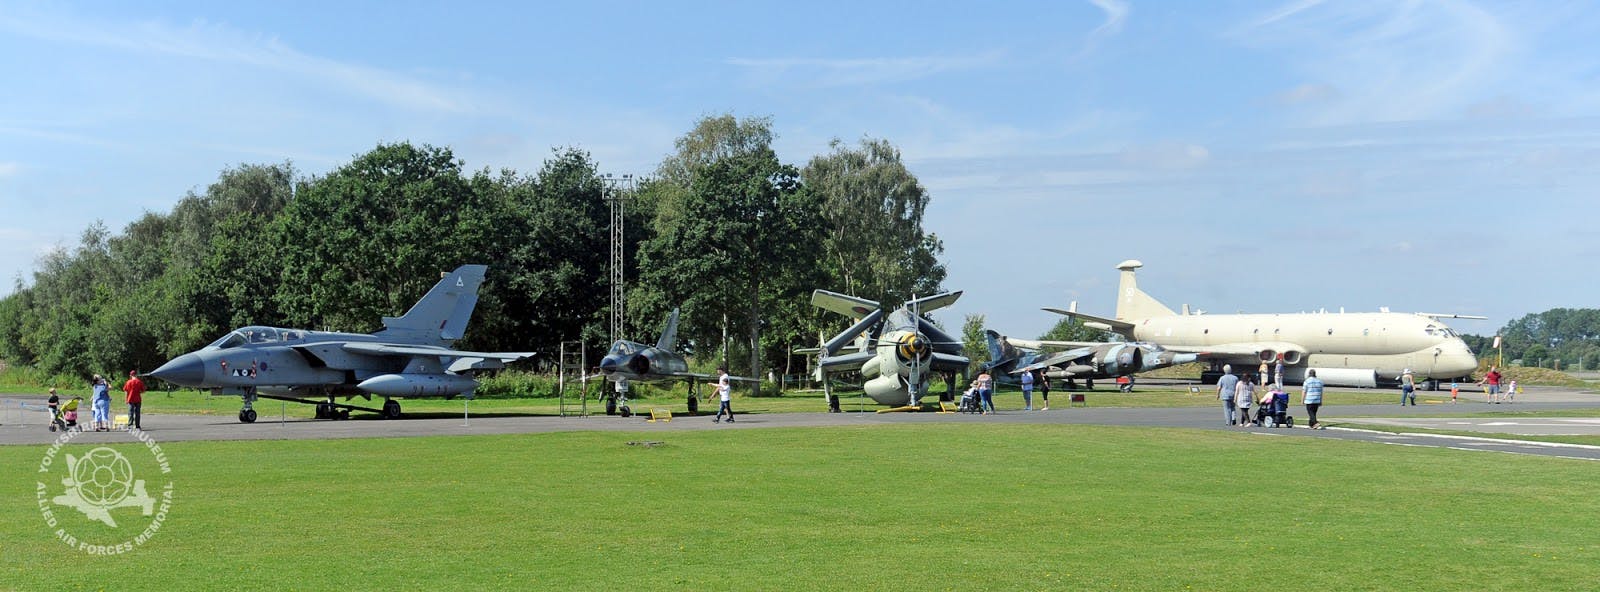 Image - Yorkshire Air Museum & Allied Air Forces Memorial